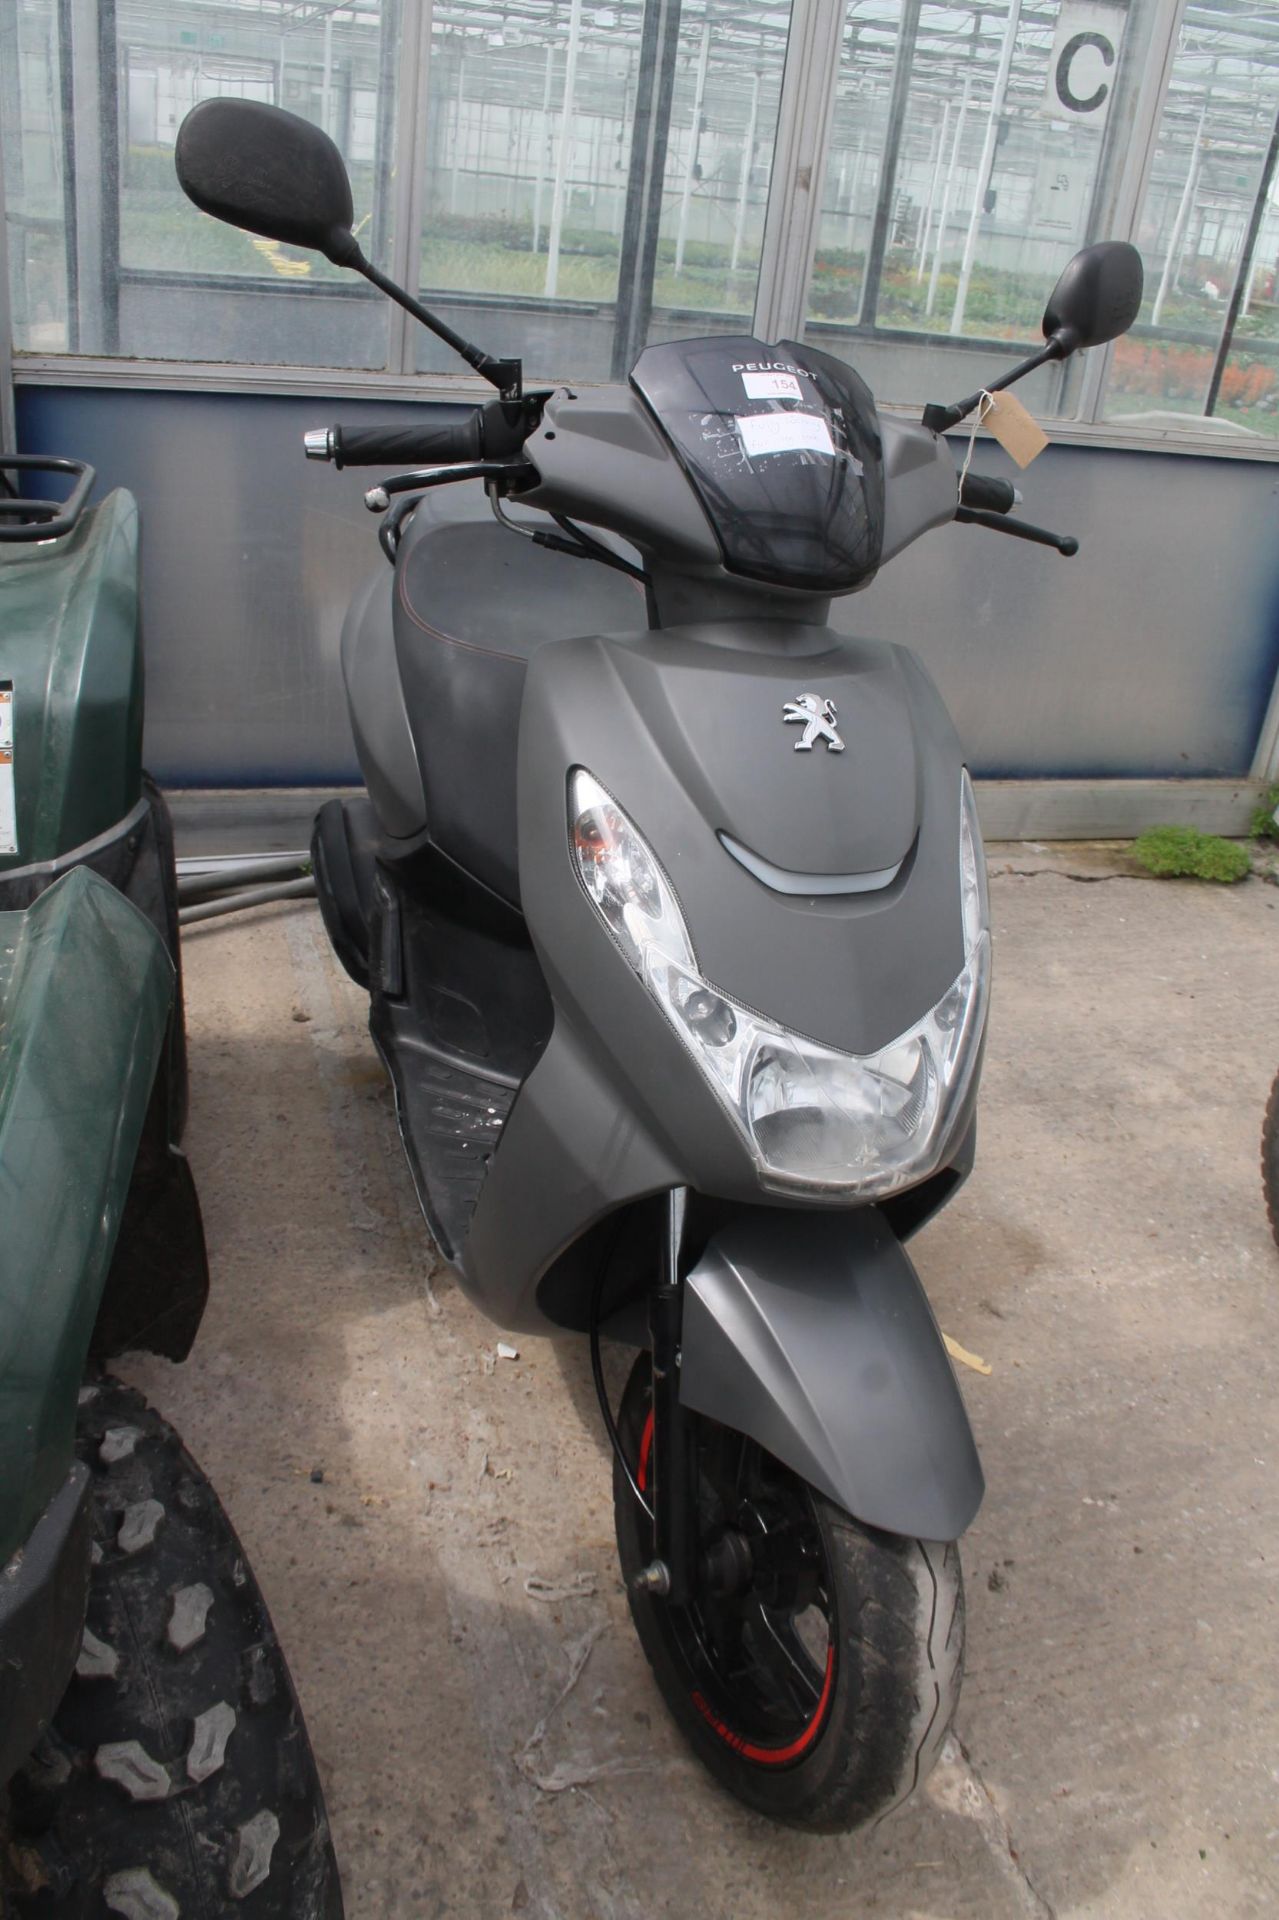 PEUGEOT SCOOTER IN WORKING ORDER NO VAT - Image 3 of 3